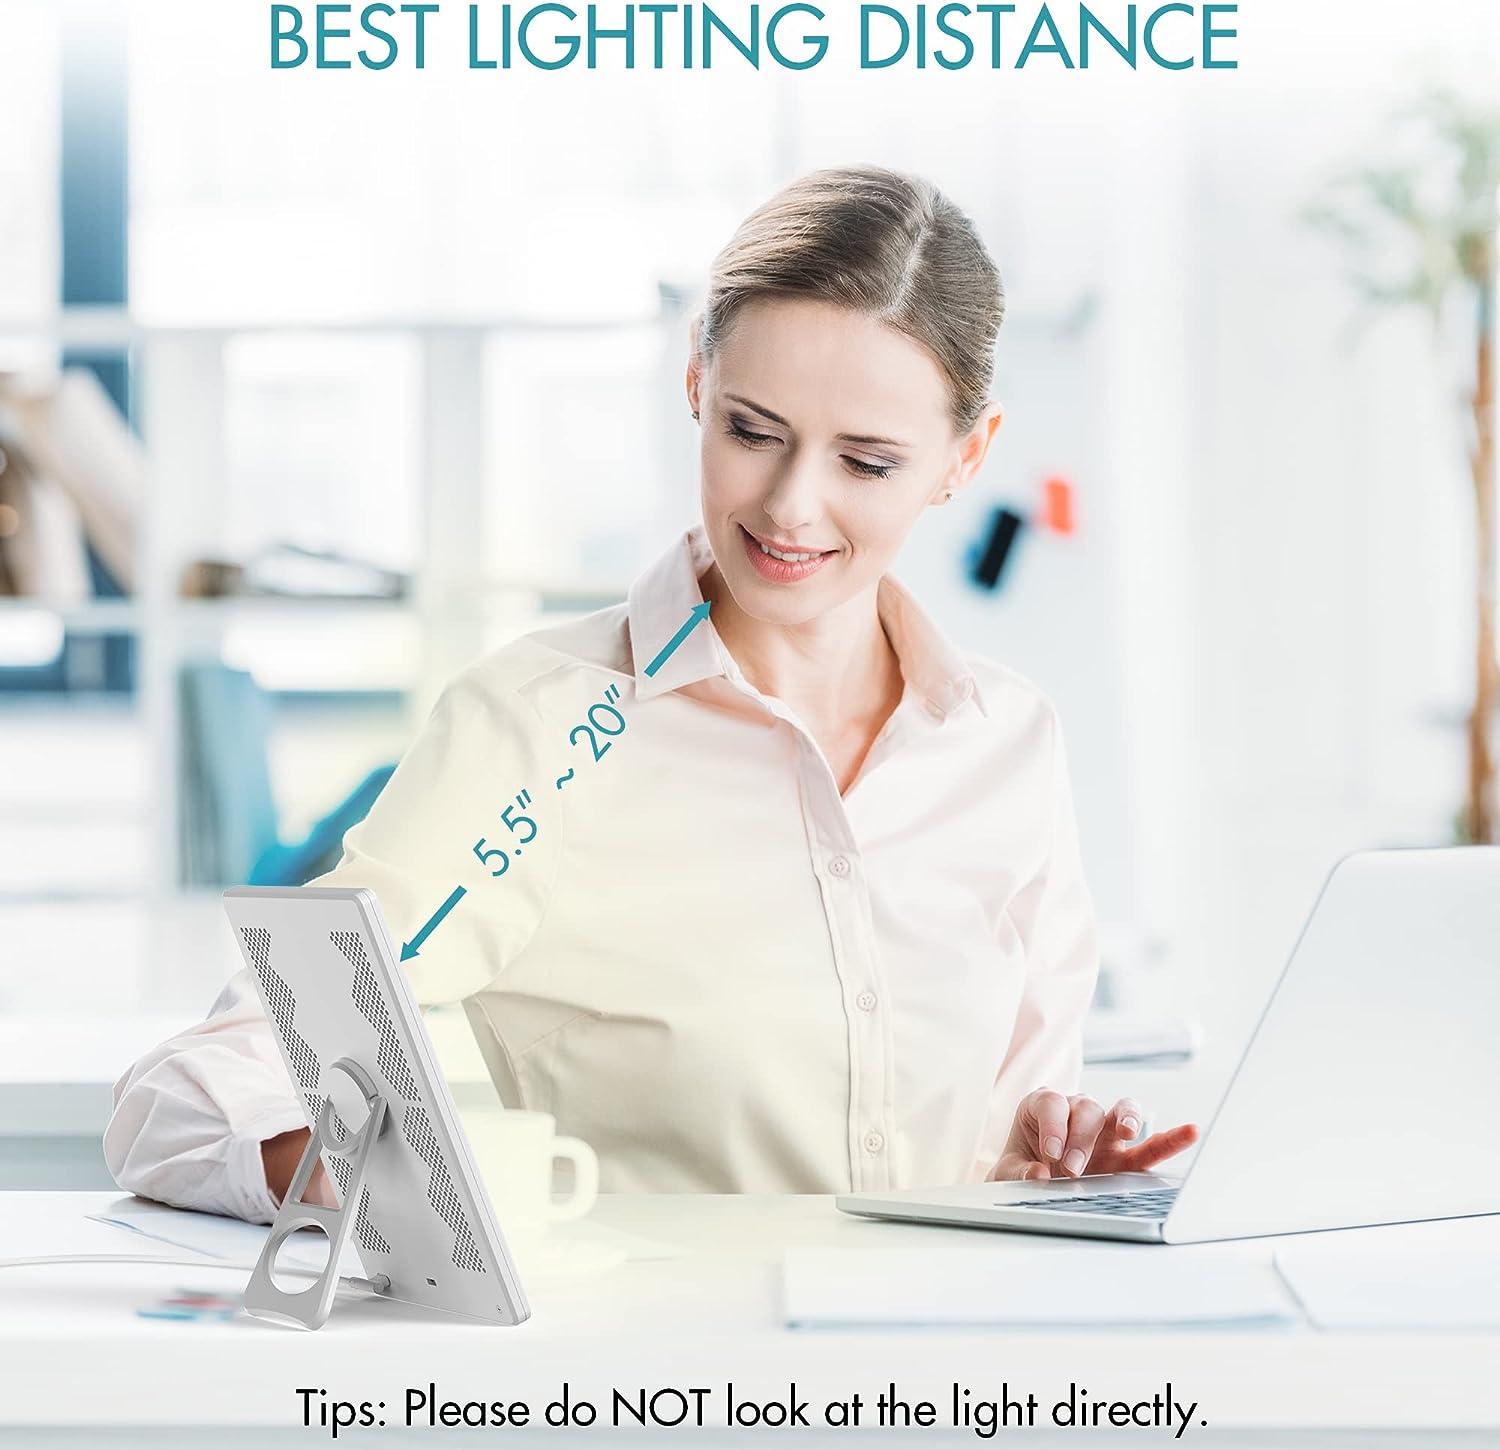 Fitfirst Light Therapy Lamp, 15000 Lux Simulated Sunlight, UV-Free LED Lamp with 3 Color Temperature  4 Brightness Settings, Adjustable Timer, Foldable Stand for Home Office Travel